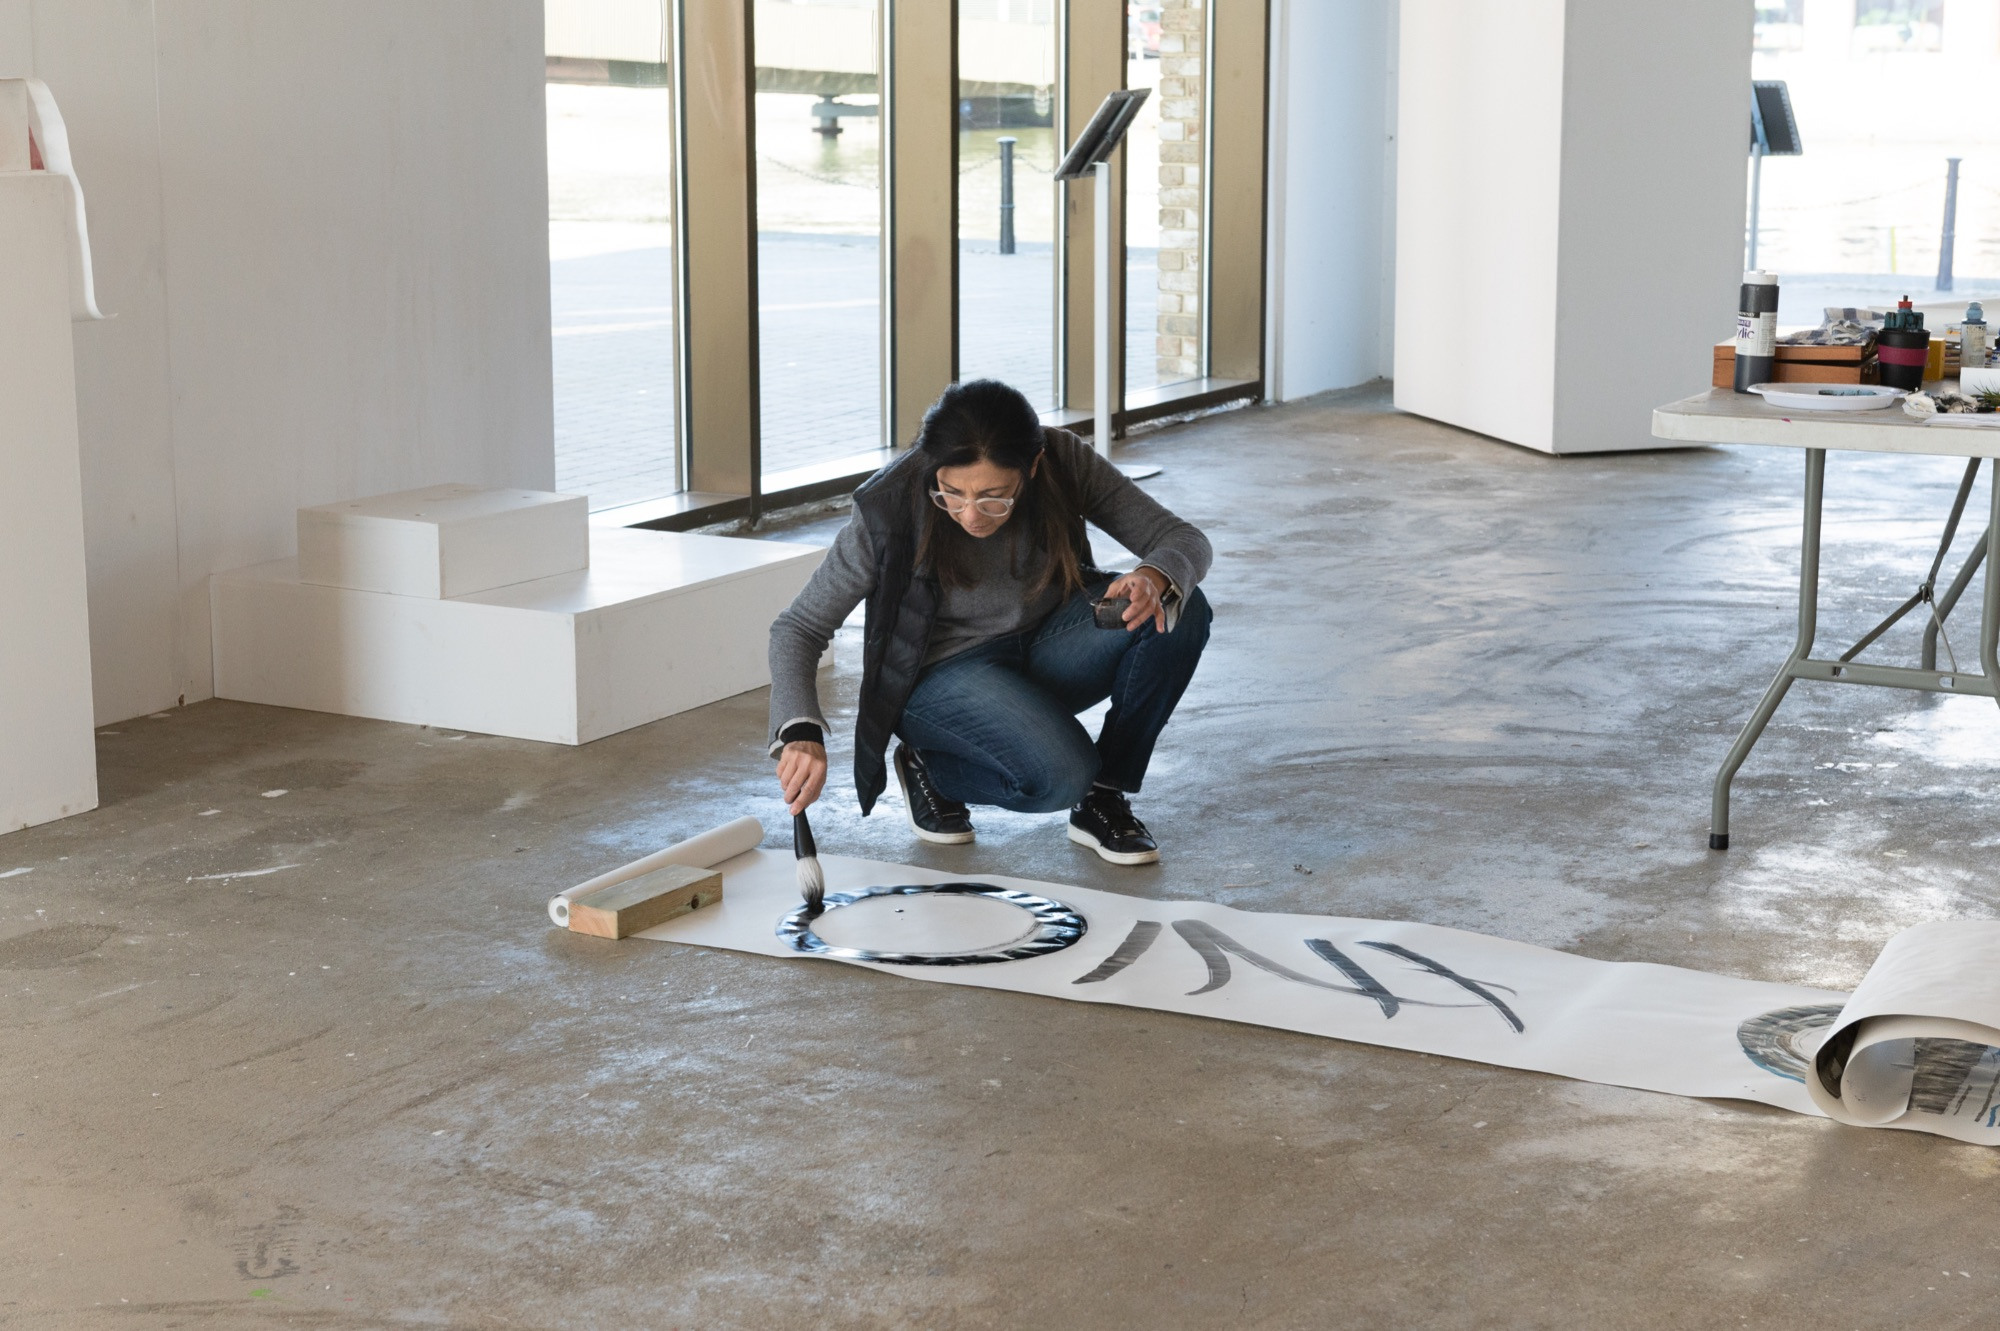 Artist bending over to work on a scroll on the floor